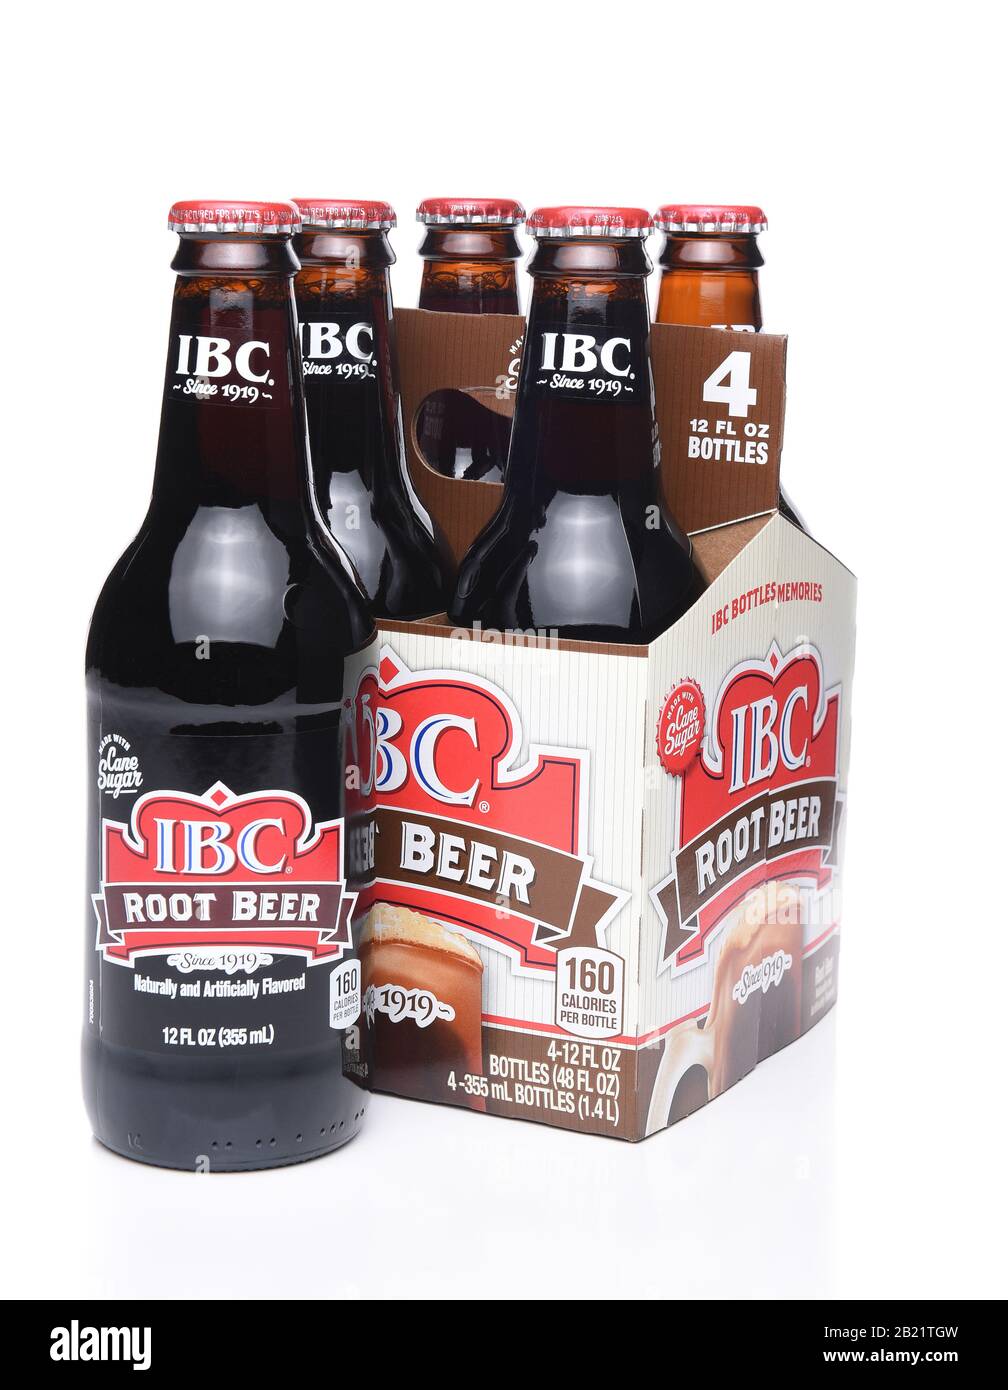 IRVINE, CA - MAY 29, 2017: IBC Root Beer 4 Pack. IBC Root Beer was founded in 1919 by the Griesedieck family as the Independent Breweries Company in S Stock Photo